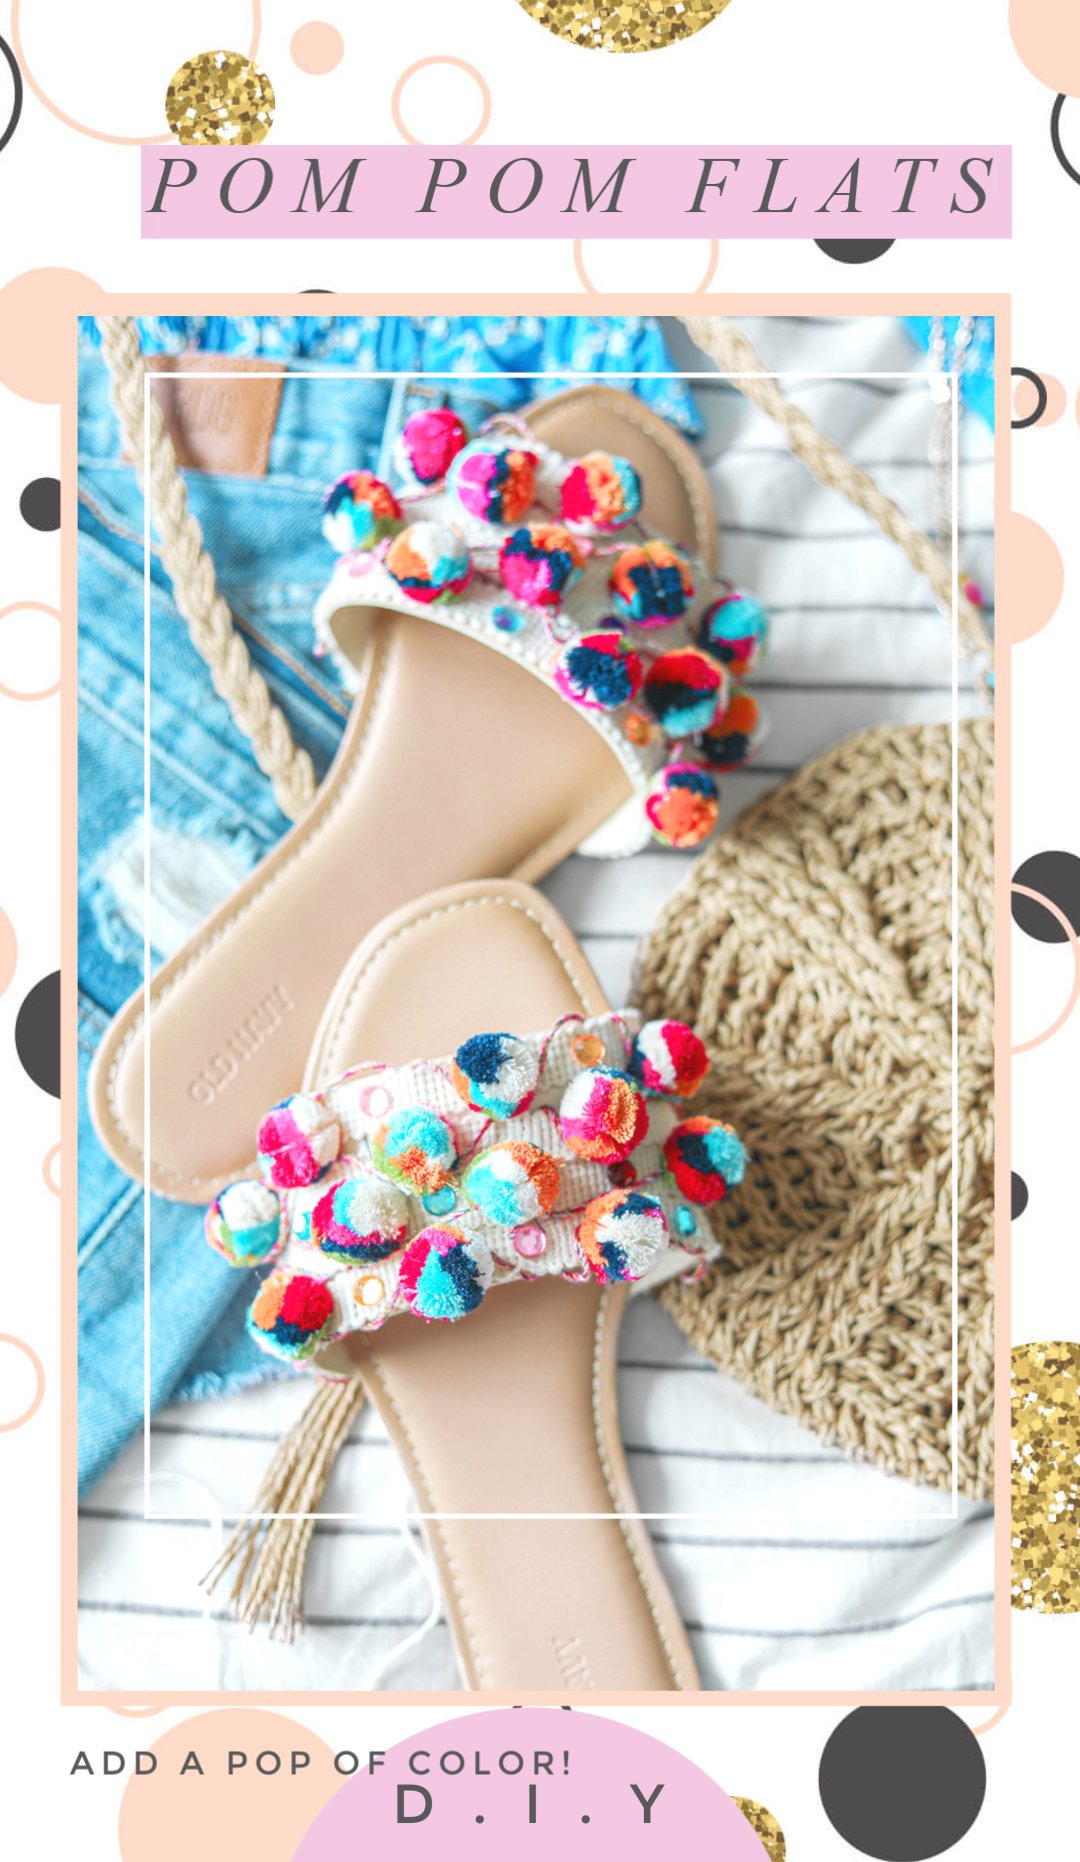 Diy pom pom shoes, fashion, colorful, souther, shoes, fun, pom, do it yourself, diy, hobby lobby, crafts, summer fun, fashion lifestyle,